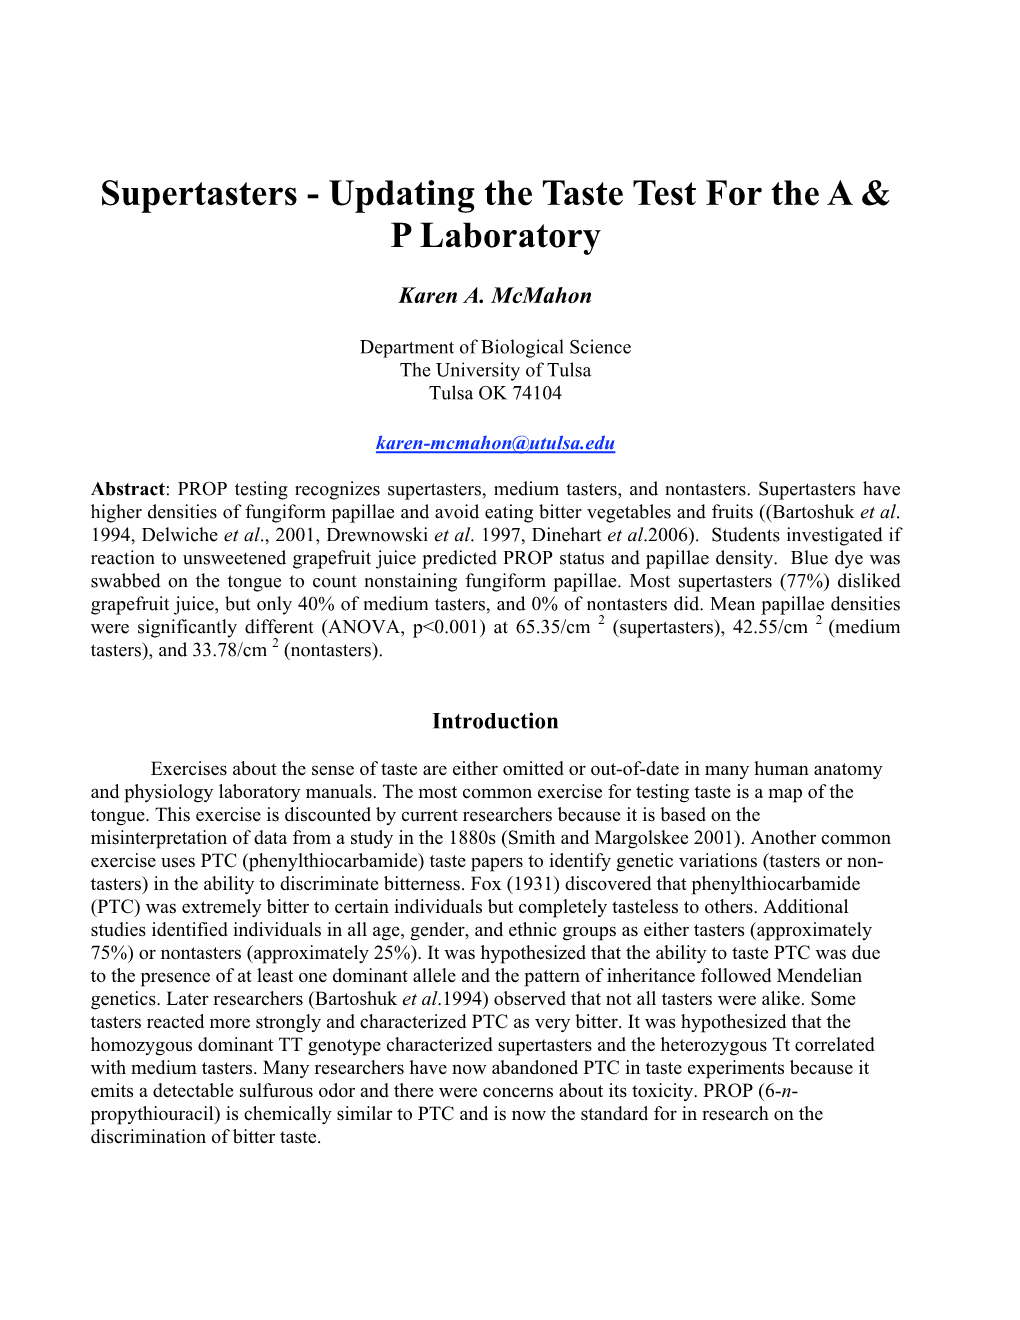 Supertasters - Updating the Taste Test for the a & P Laboratory